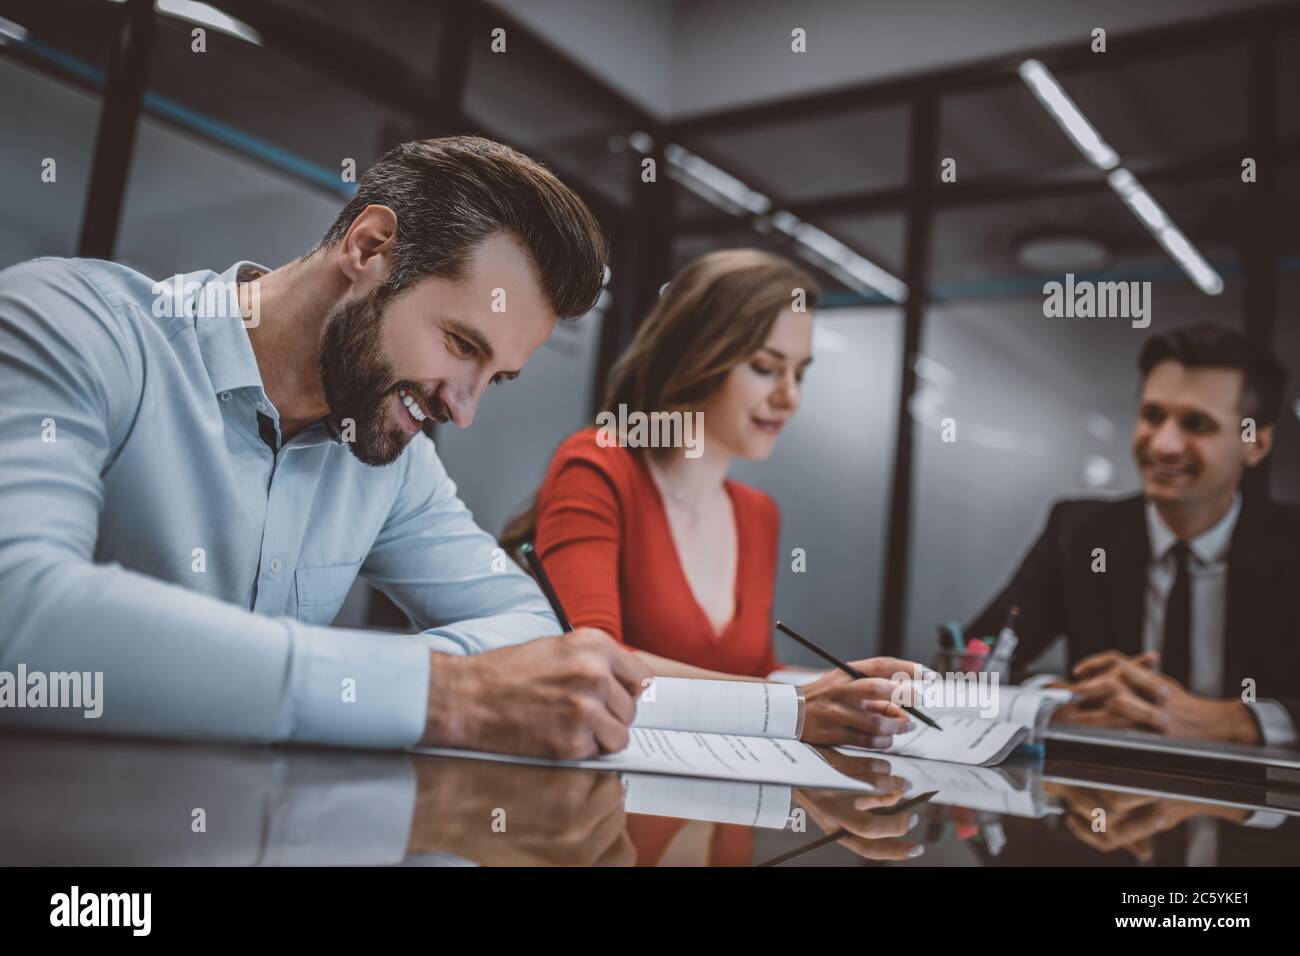 Smiling man signing a document together with his wife Stock Photo